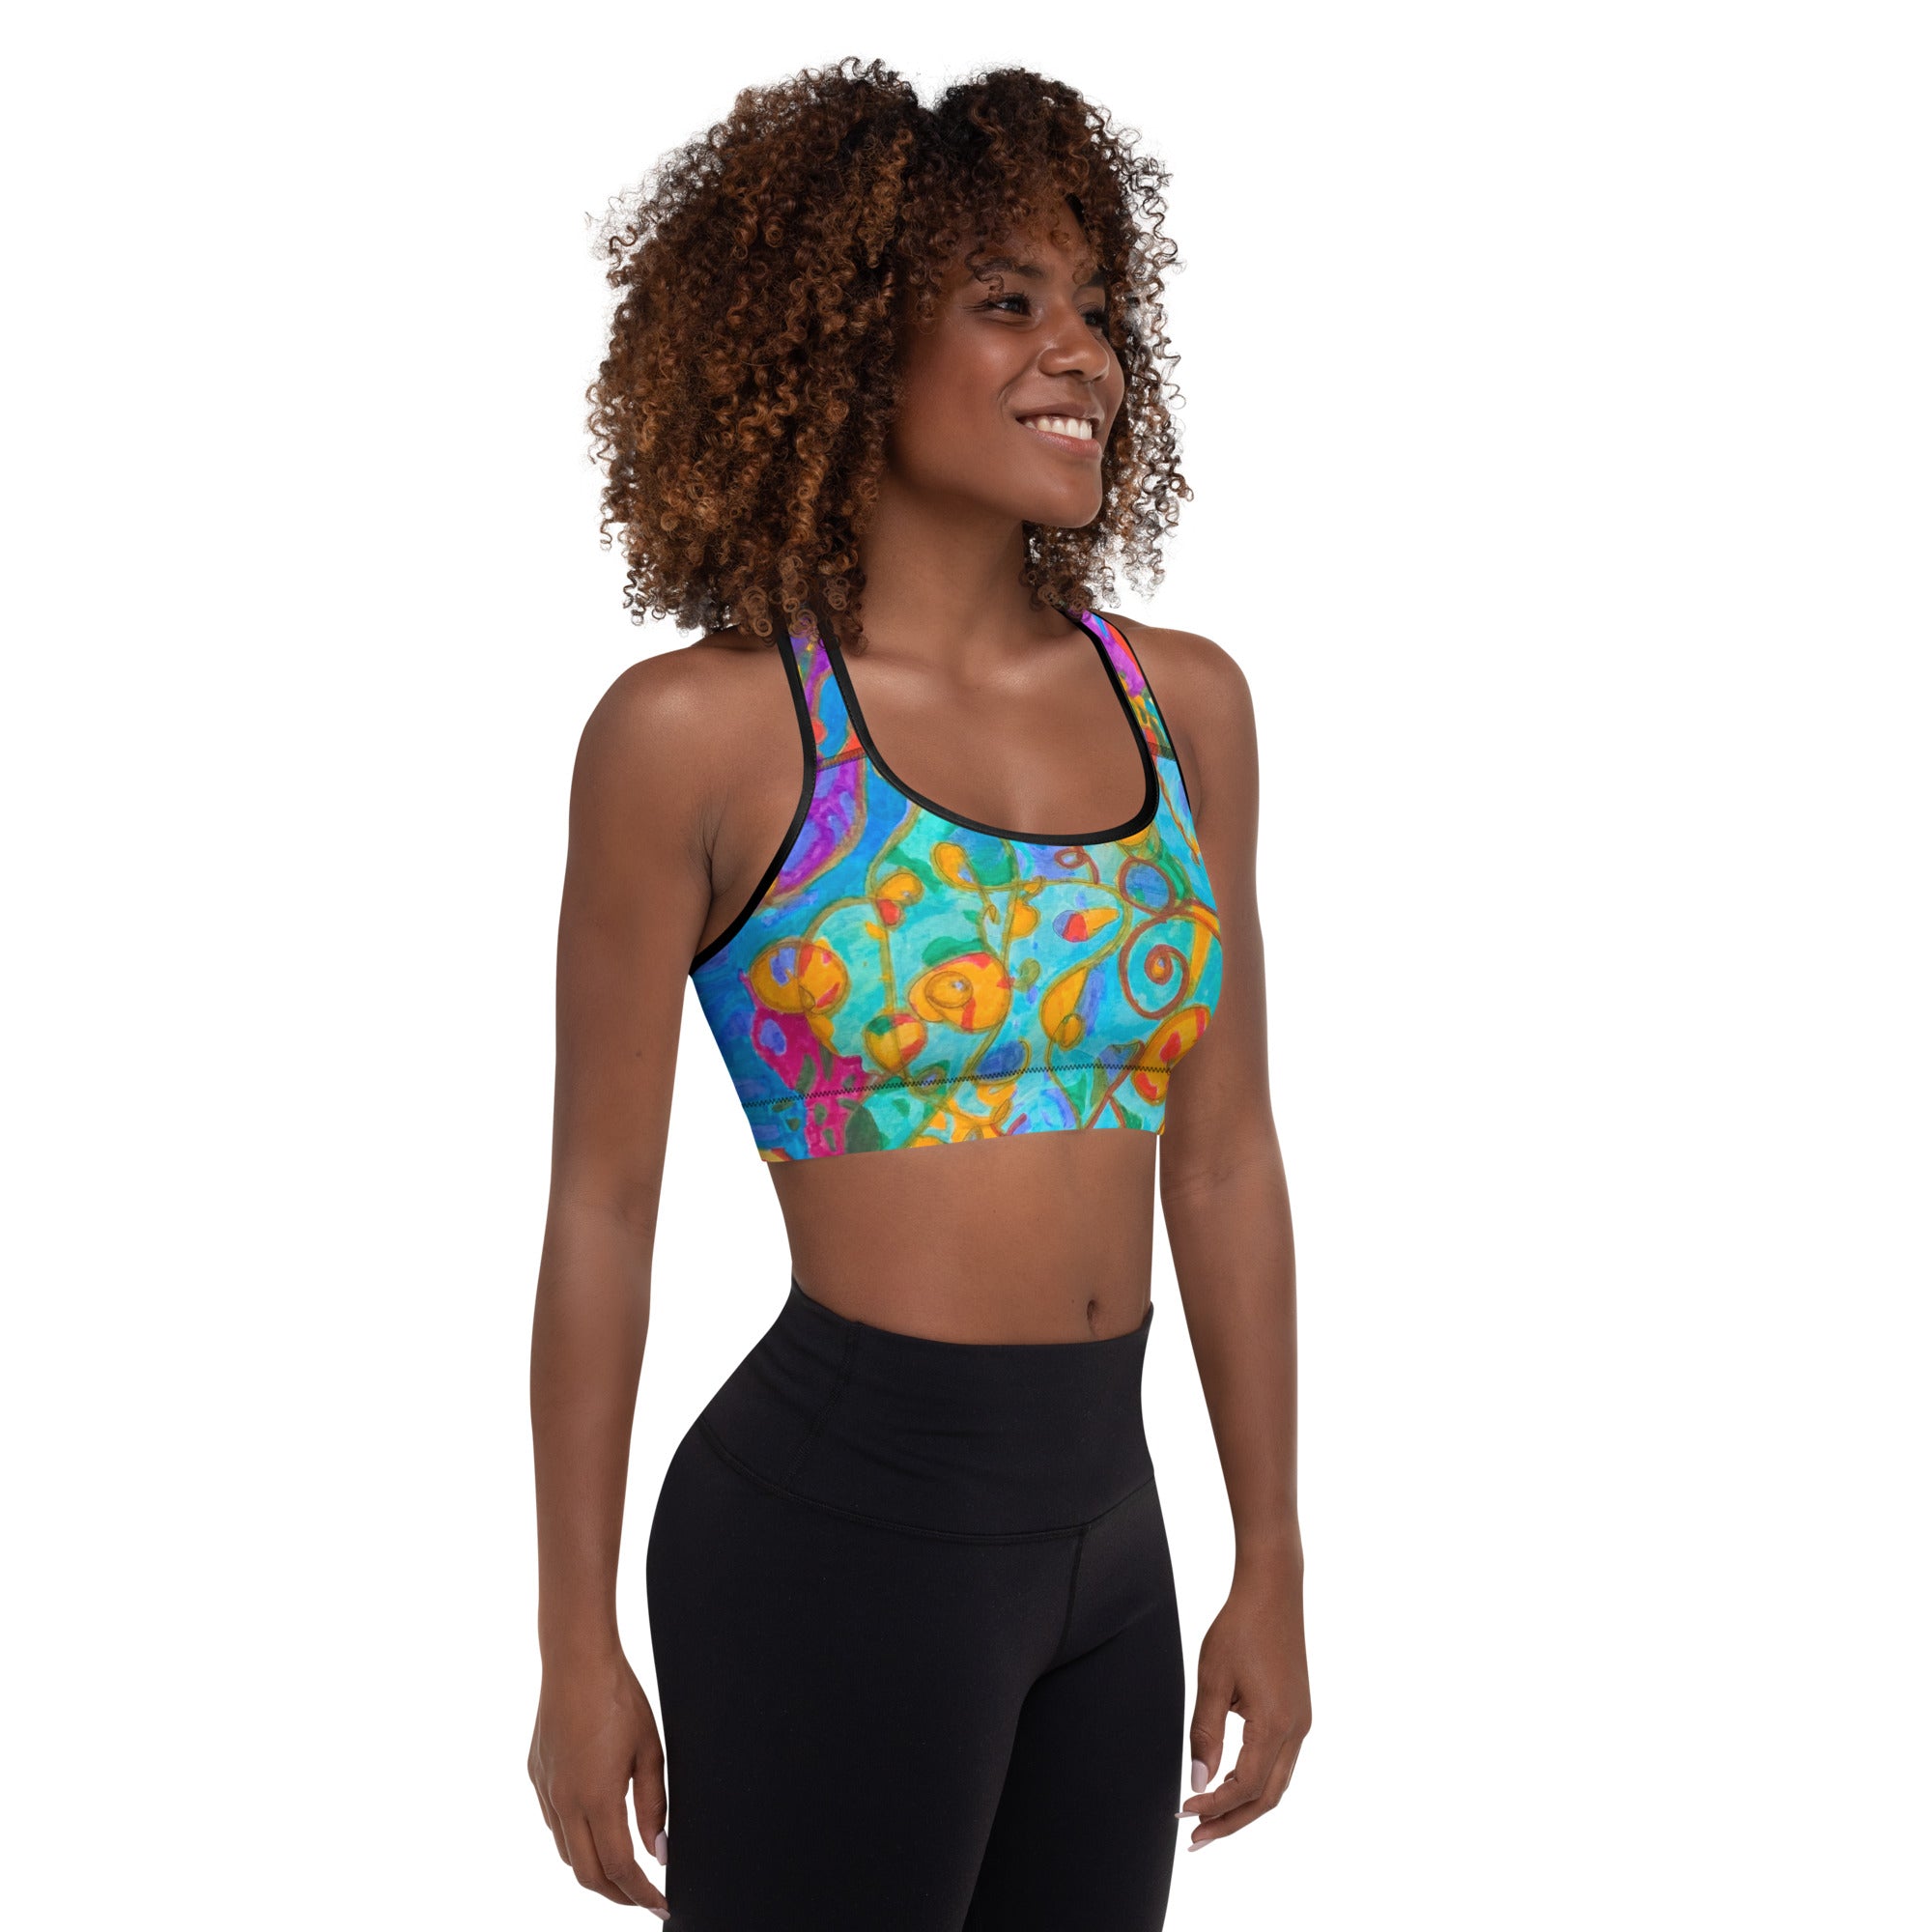 Curled Up Abstract Padded Sports Bra - Art Love Decor